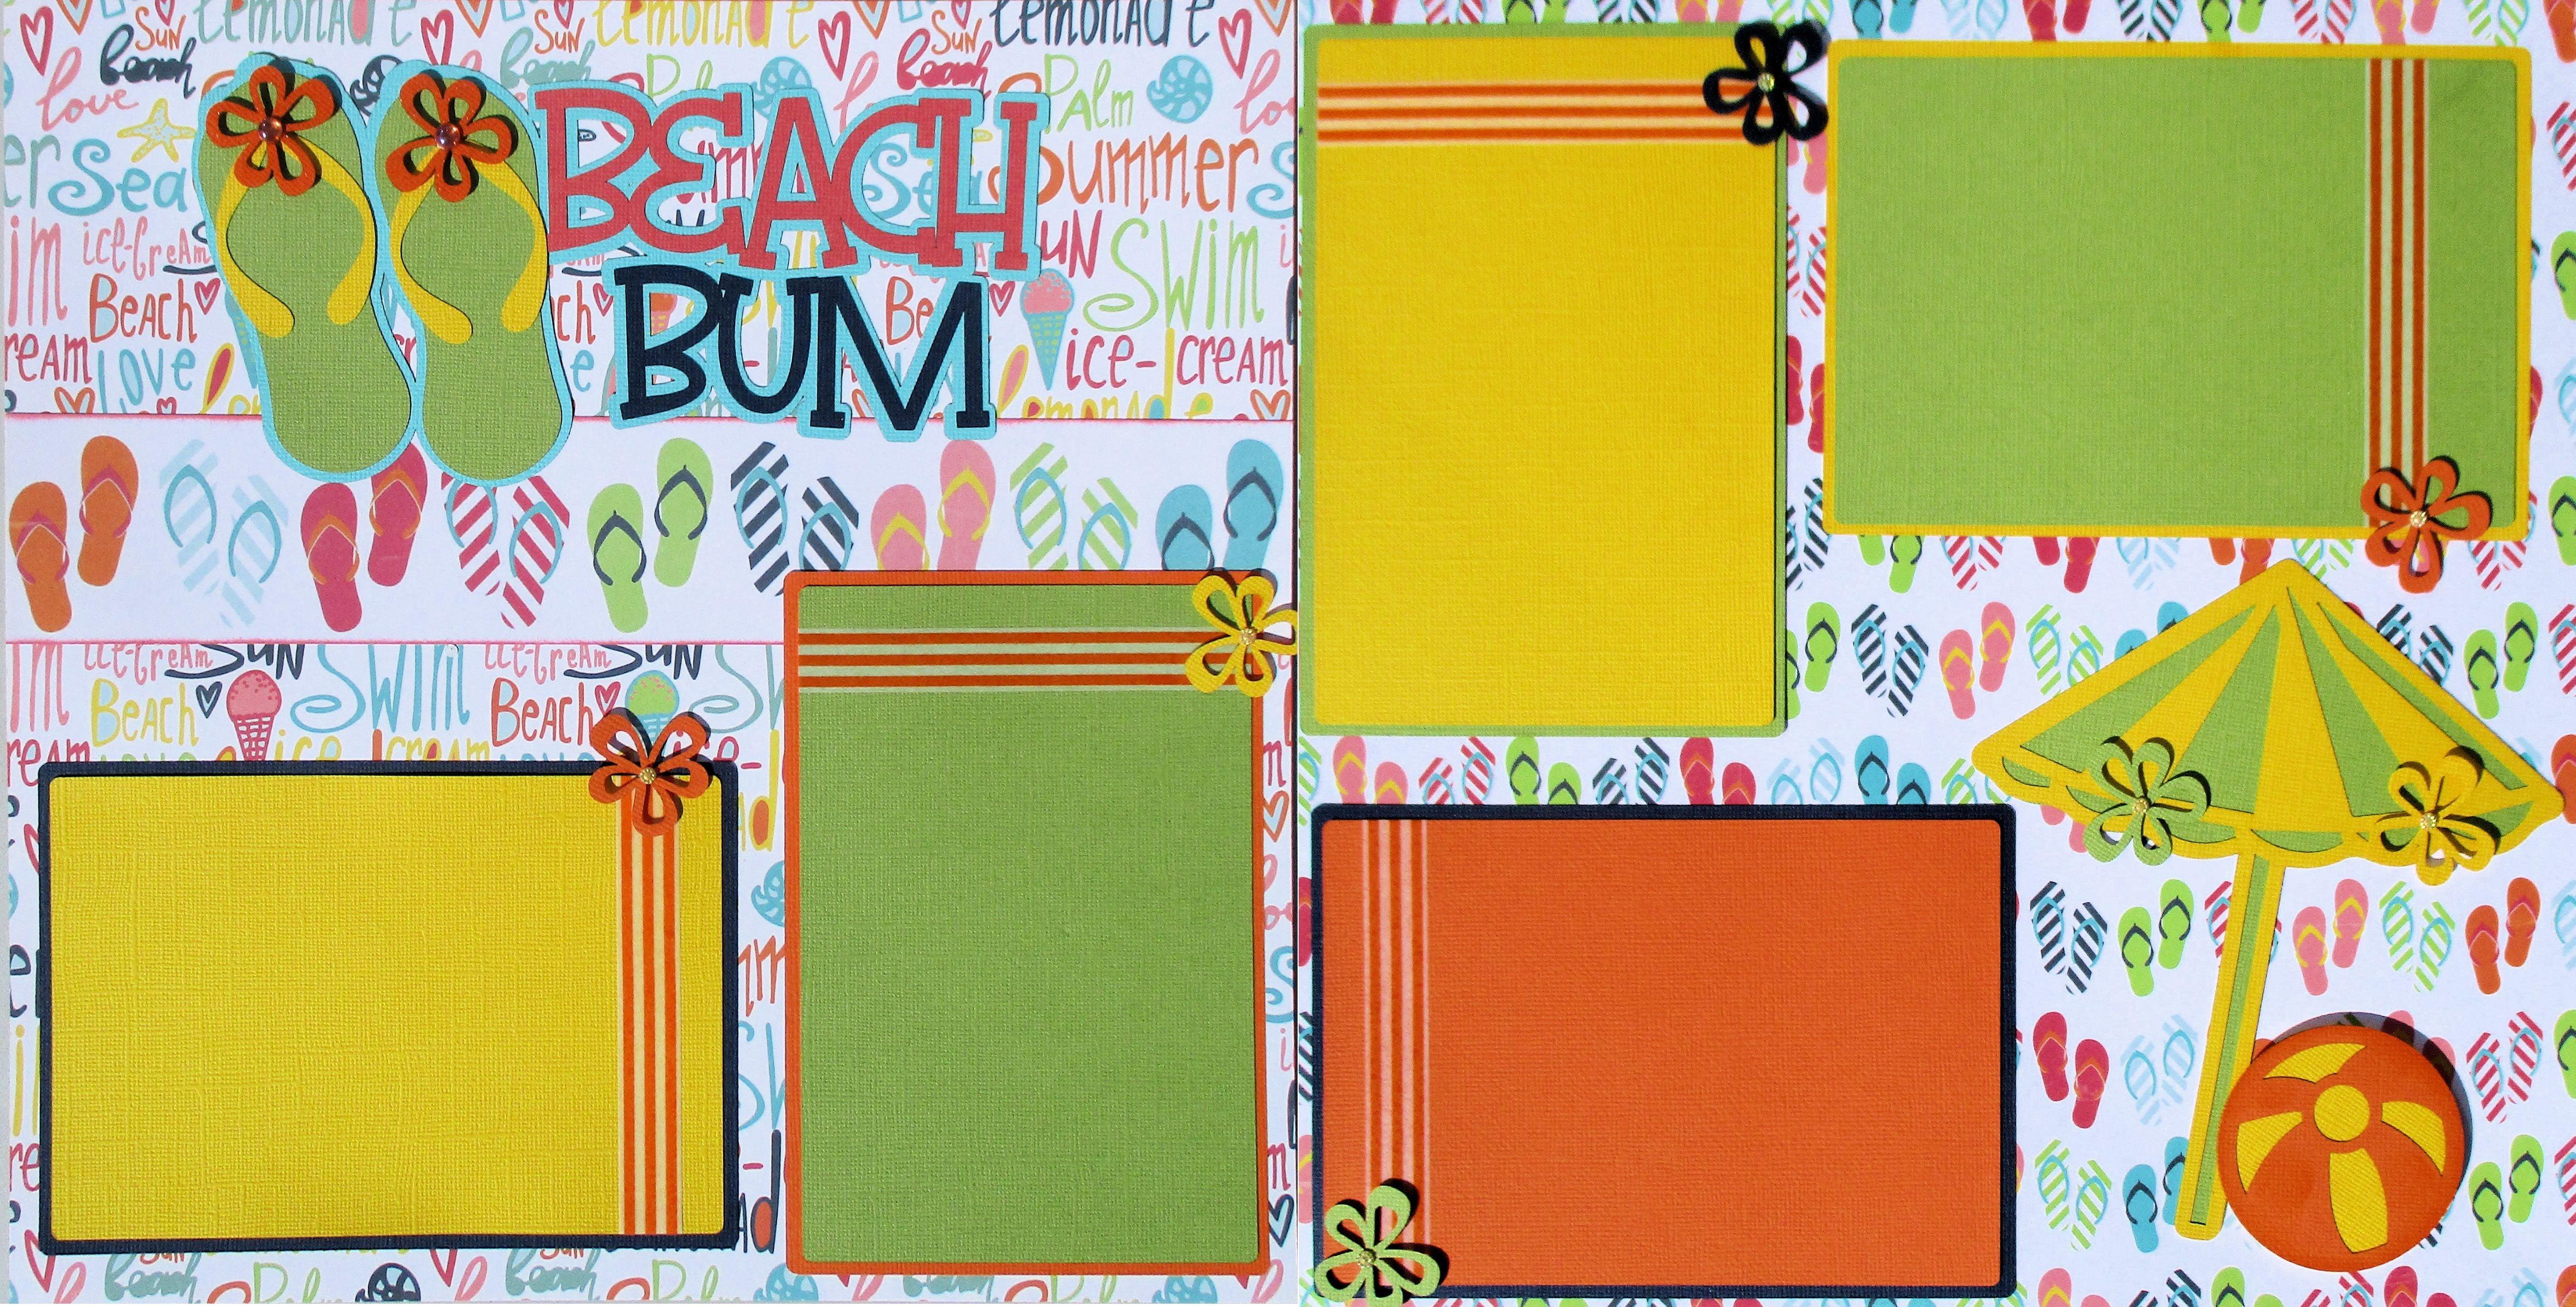 Beach Bum Premade Embellished Two-Page 12 x 12 Scrapbook Premade by SSC Designs